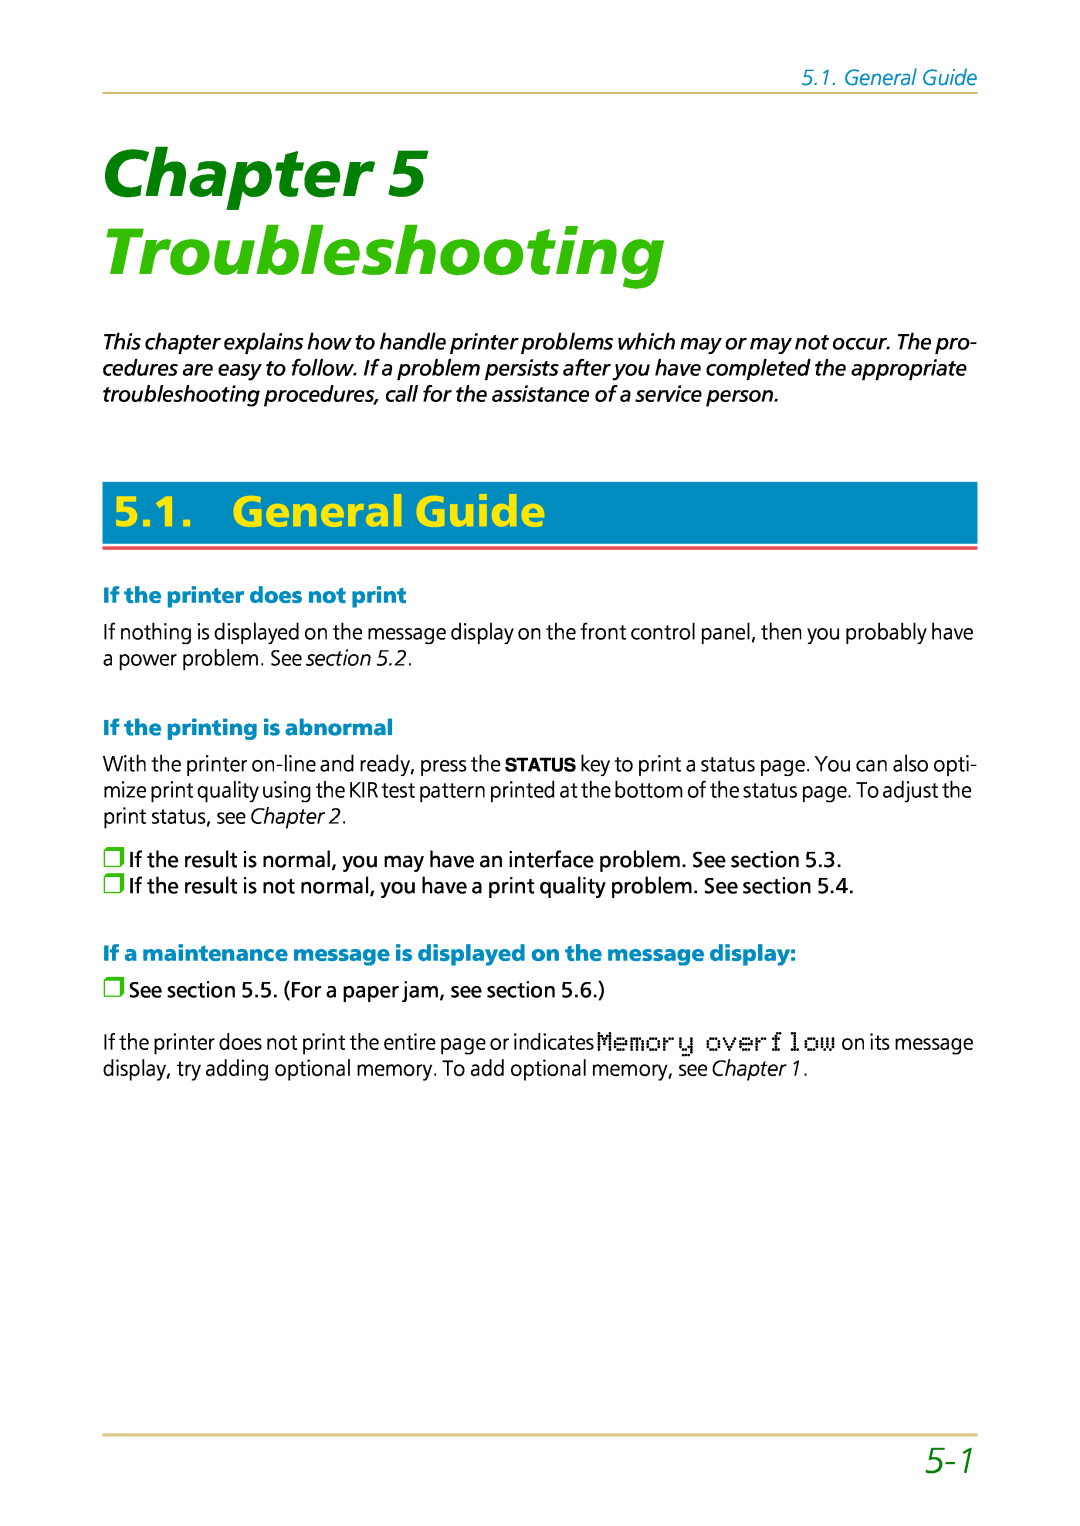 Kyocera FS-1700 Troubleshooting, General Guide, Chapter, If the printer does not print, If the printing is abnormal 